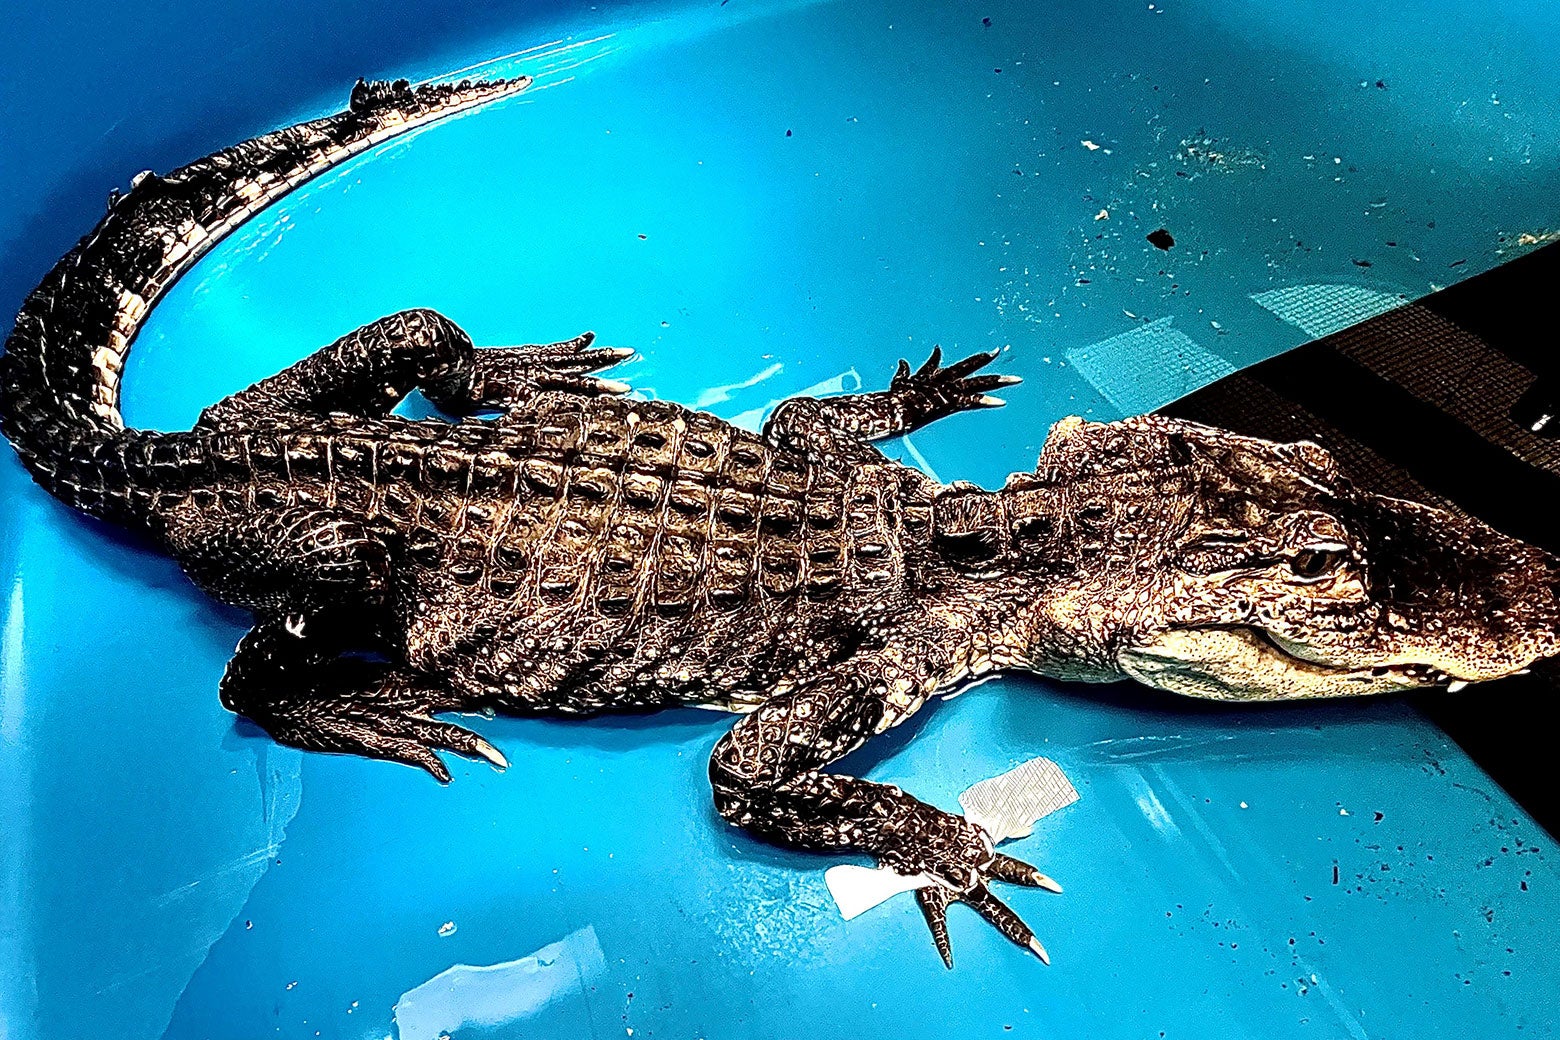 An emaciated alligator in a blue pool.